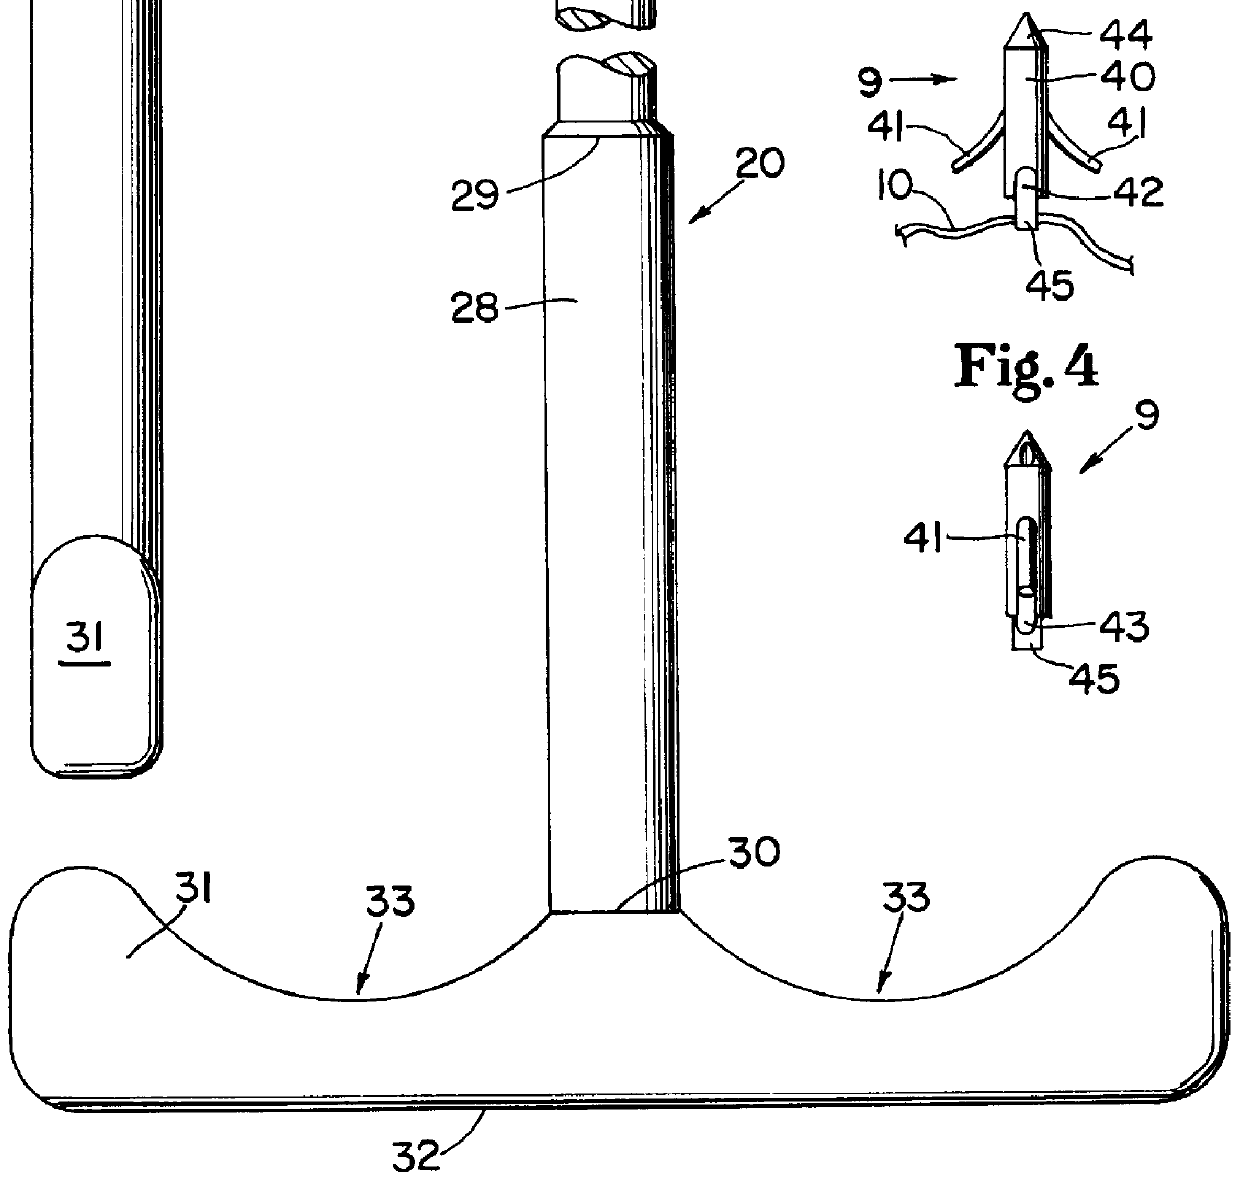 Bone anchor-insertion tool and surgical method employing same